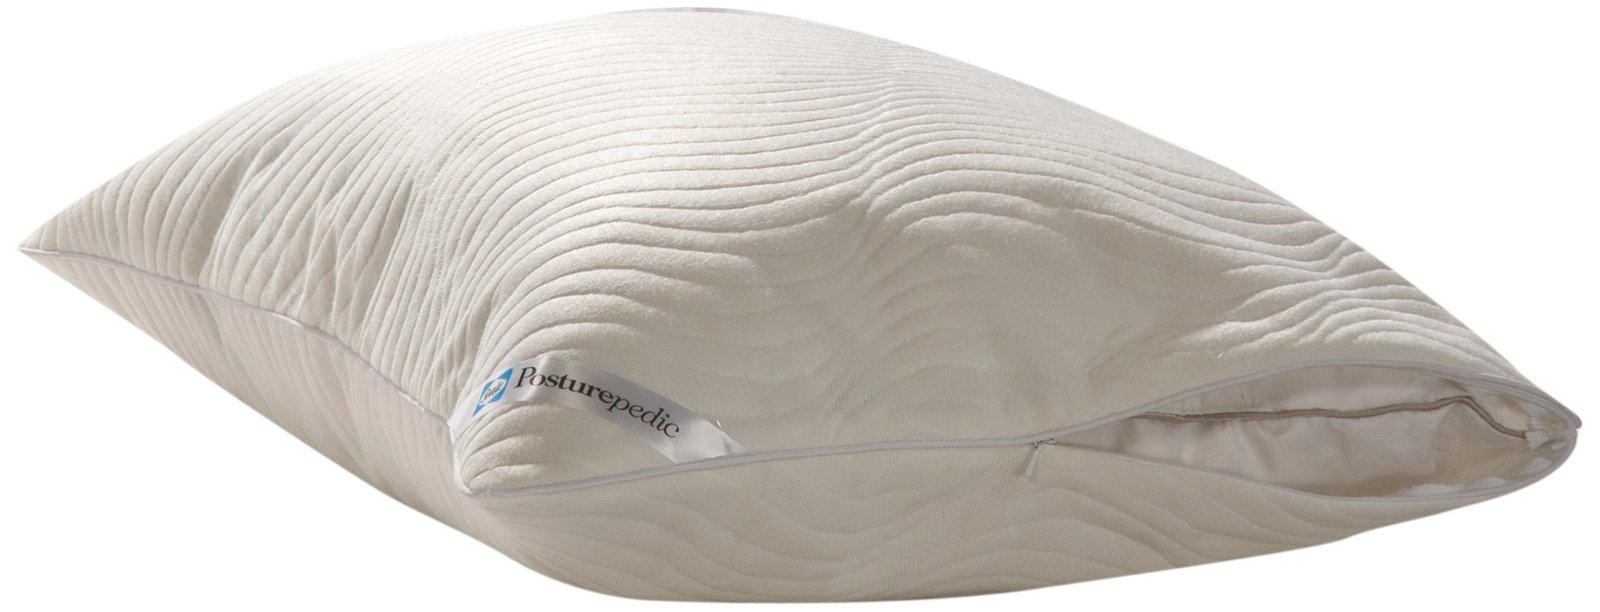 sealy zippered mattress protector